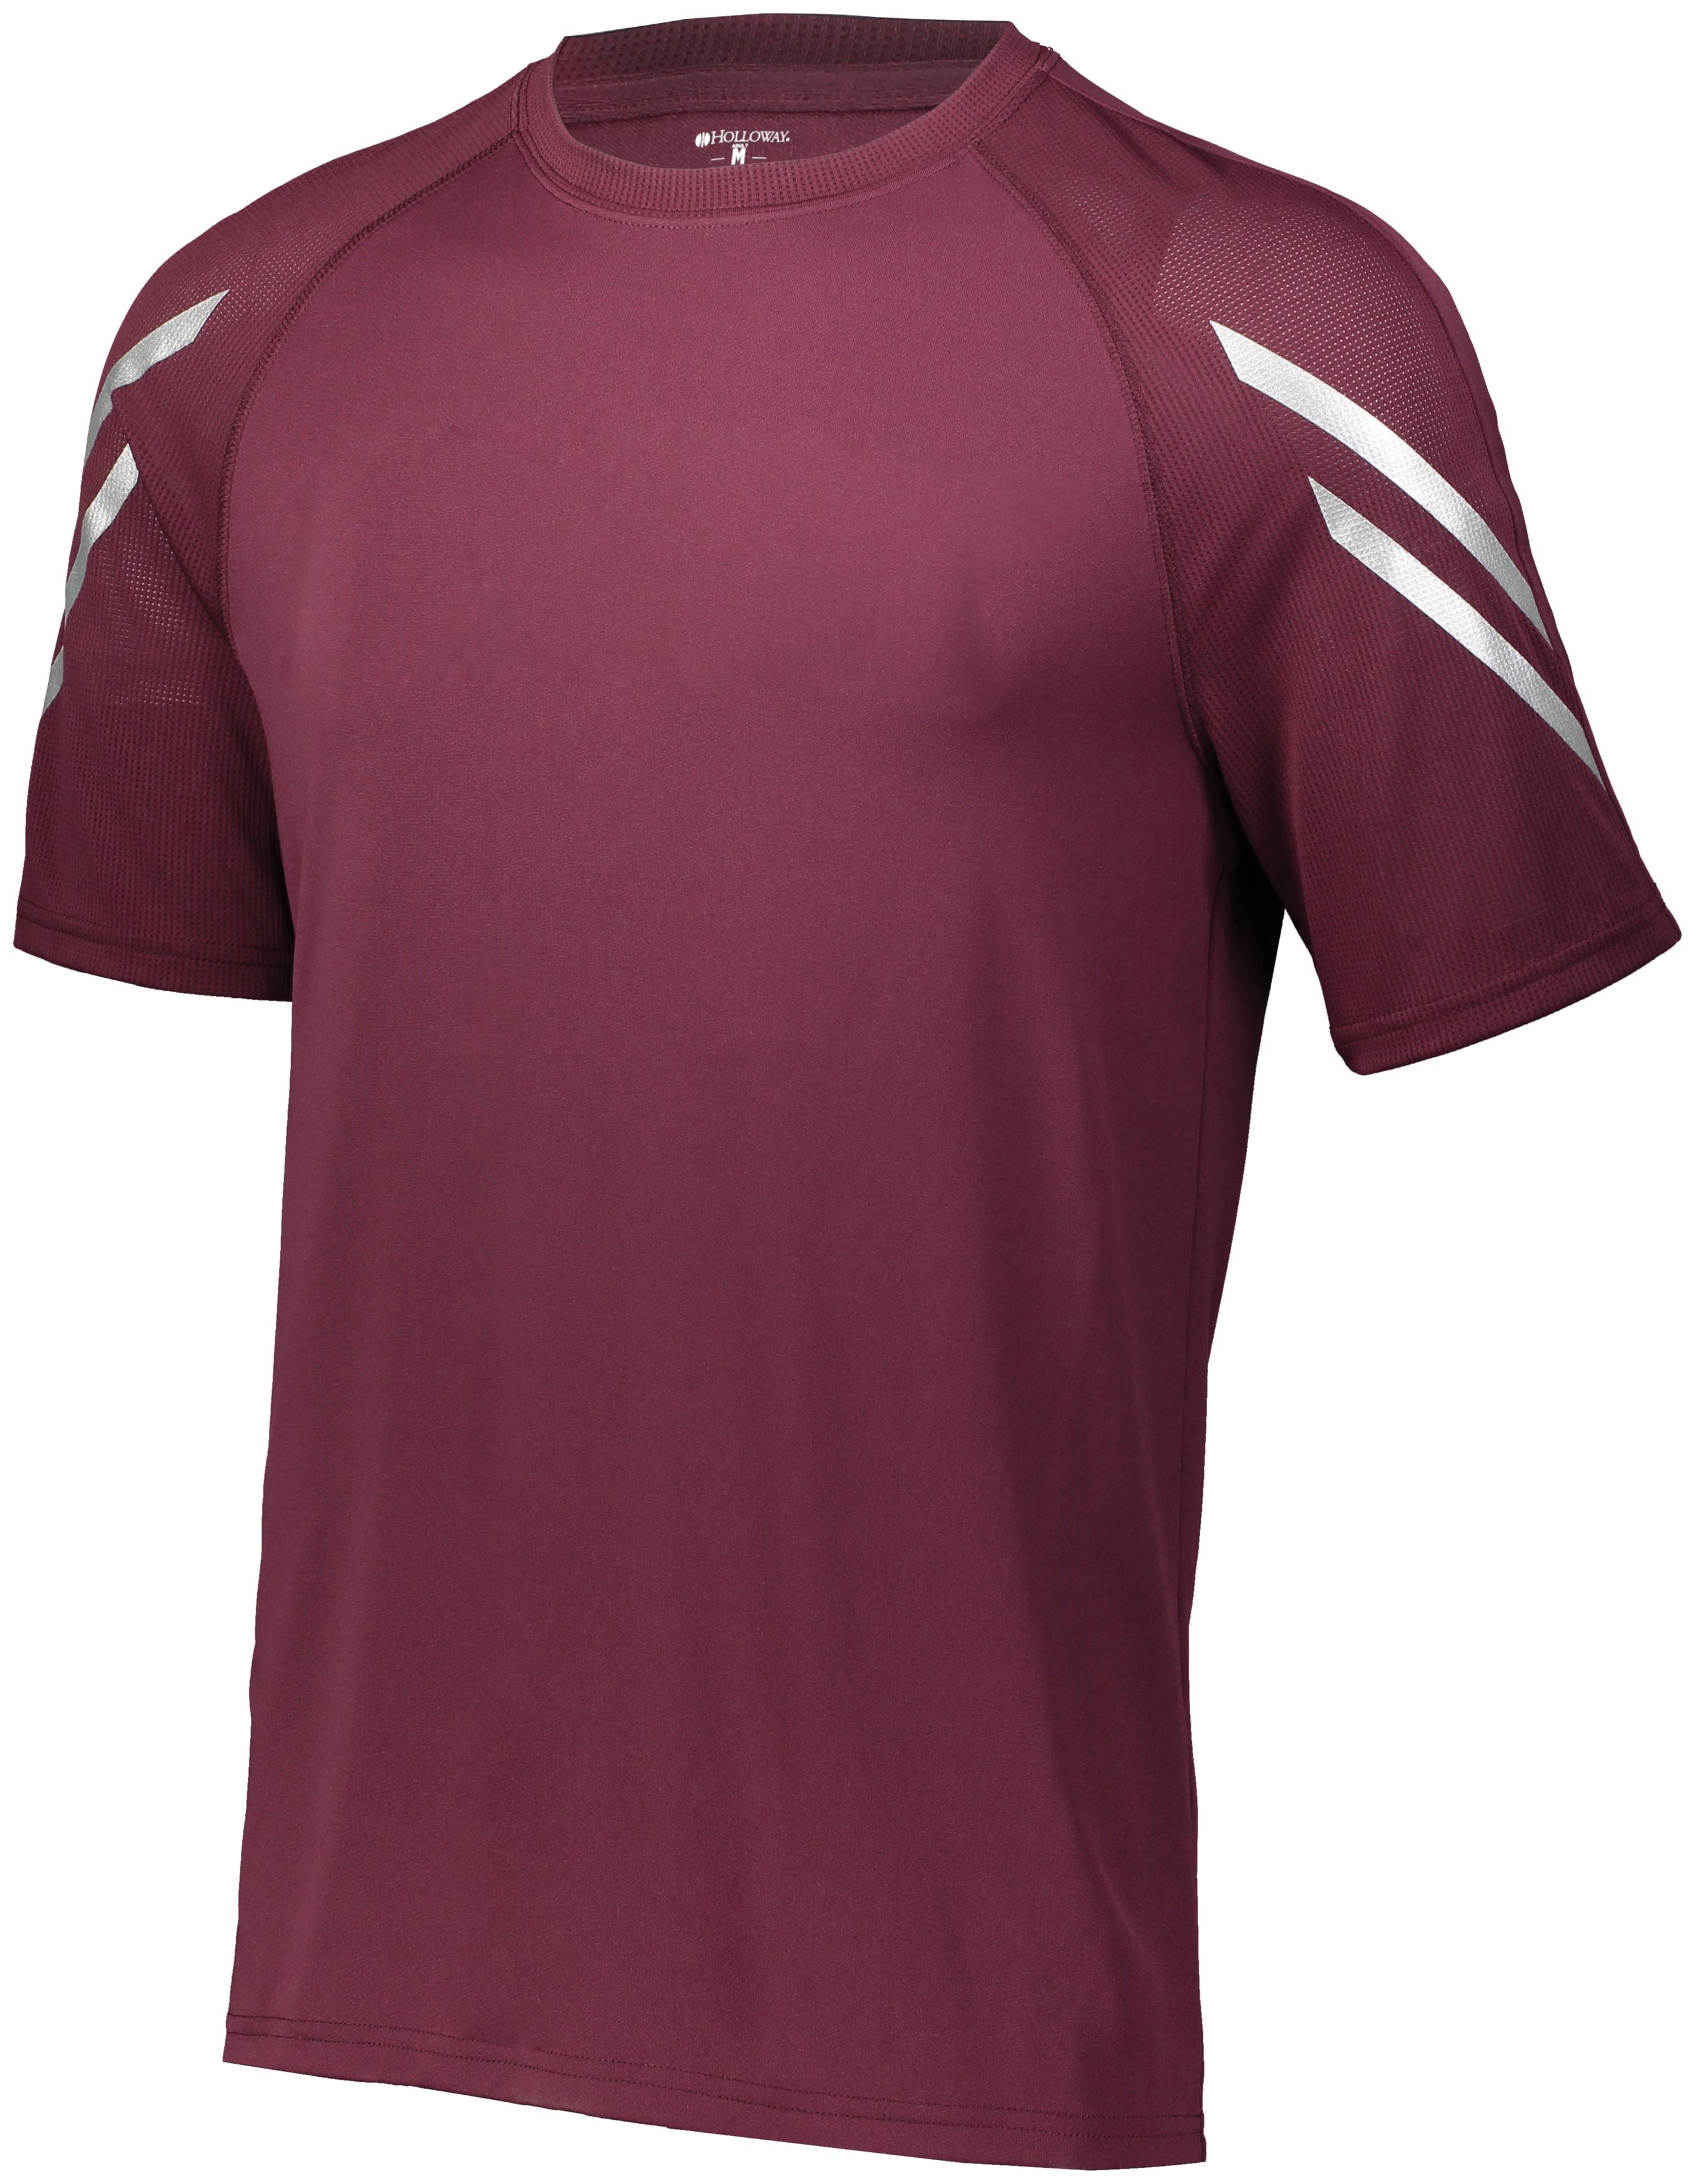 Holloway Flux Shirt Short Sleeve in Maroon  -Part of the Adult, Holloway, Shirts, Flux-Collection product lines at KanaleyCreations.com